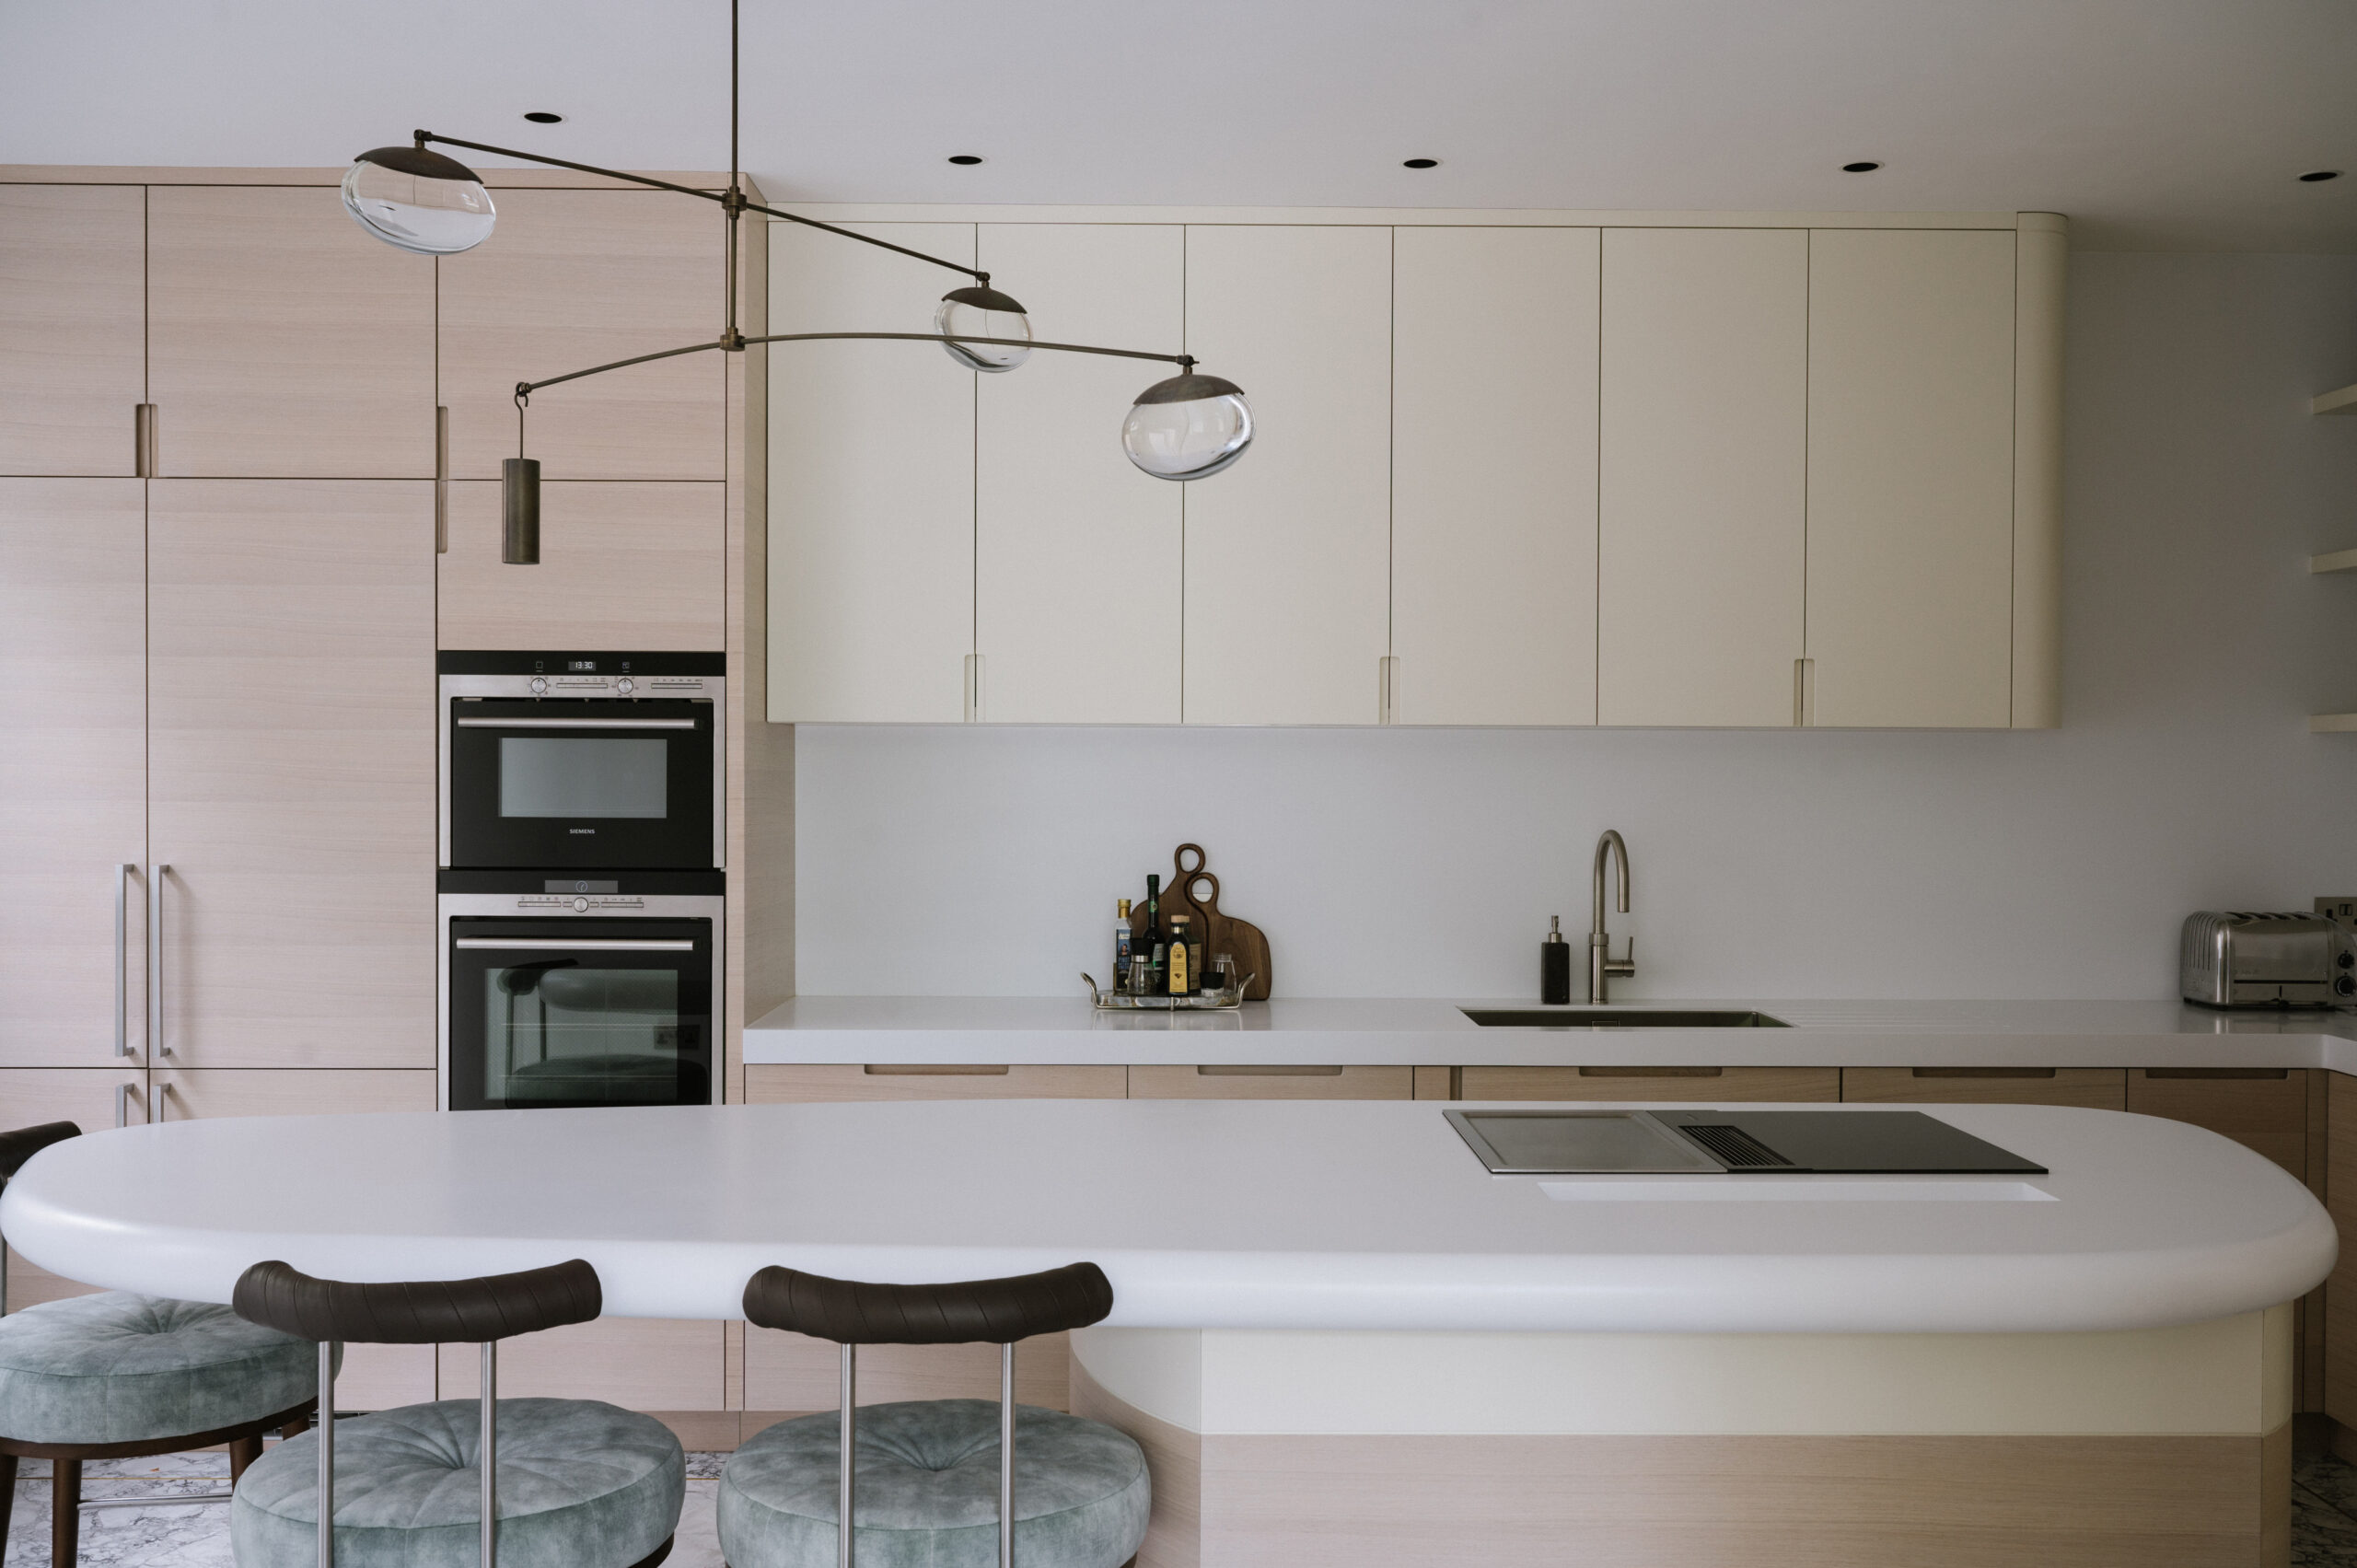 Kia Designs - Hampstead House Kitchen with Cantilevered Island